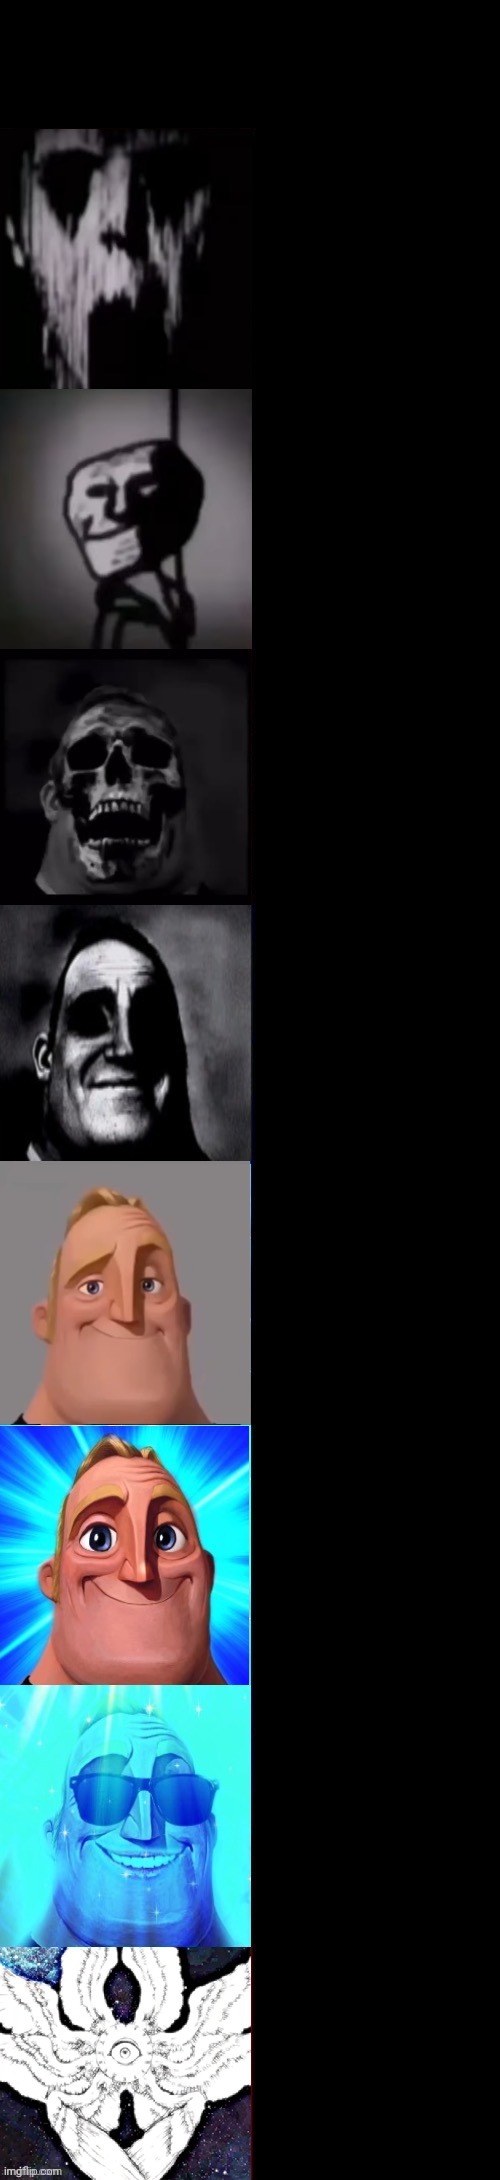 Mr incredible becoming uncanny to canny 8 panel | image tagged in mr incredible becoming uncanny to canny 8 panel | made w/ Imgflip meme maker